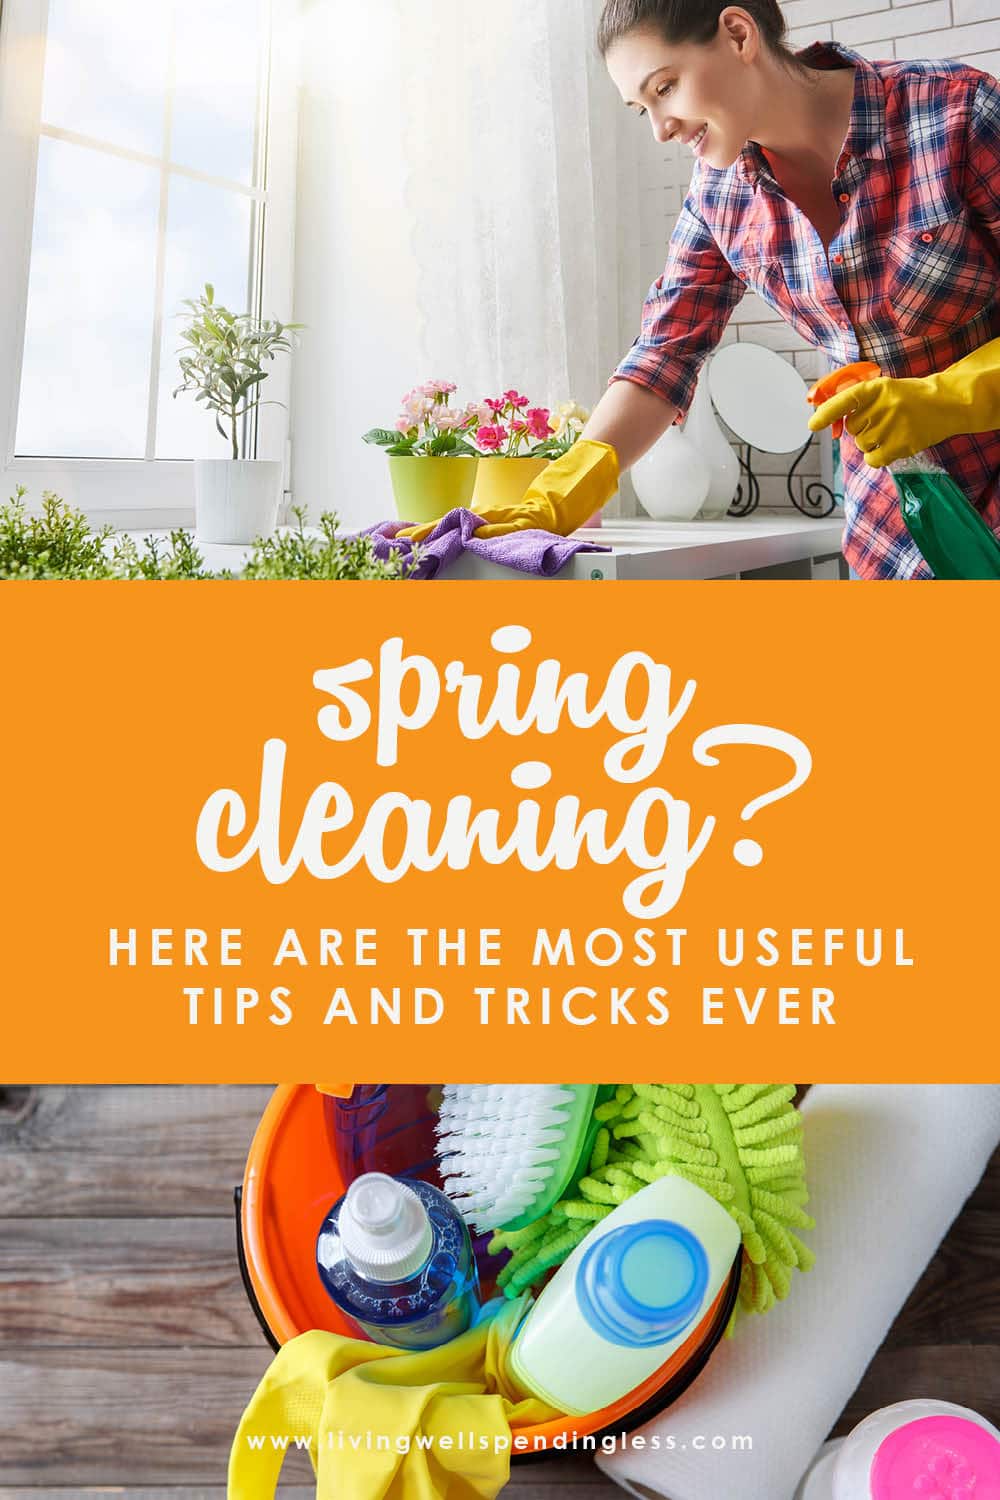 If you're looking for the best Spring Cleaning tips, tricks, and hacks to declutter, deep clean, and freshen up your home, then this is for you! #springcleaning #springcleaningtips #declutter #cleaningtips #decluttering #tidyingup #cleaninghacks